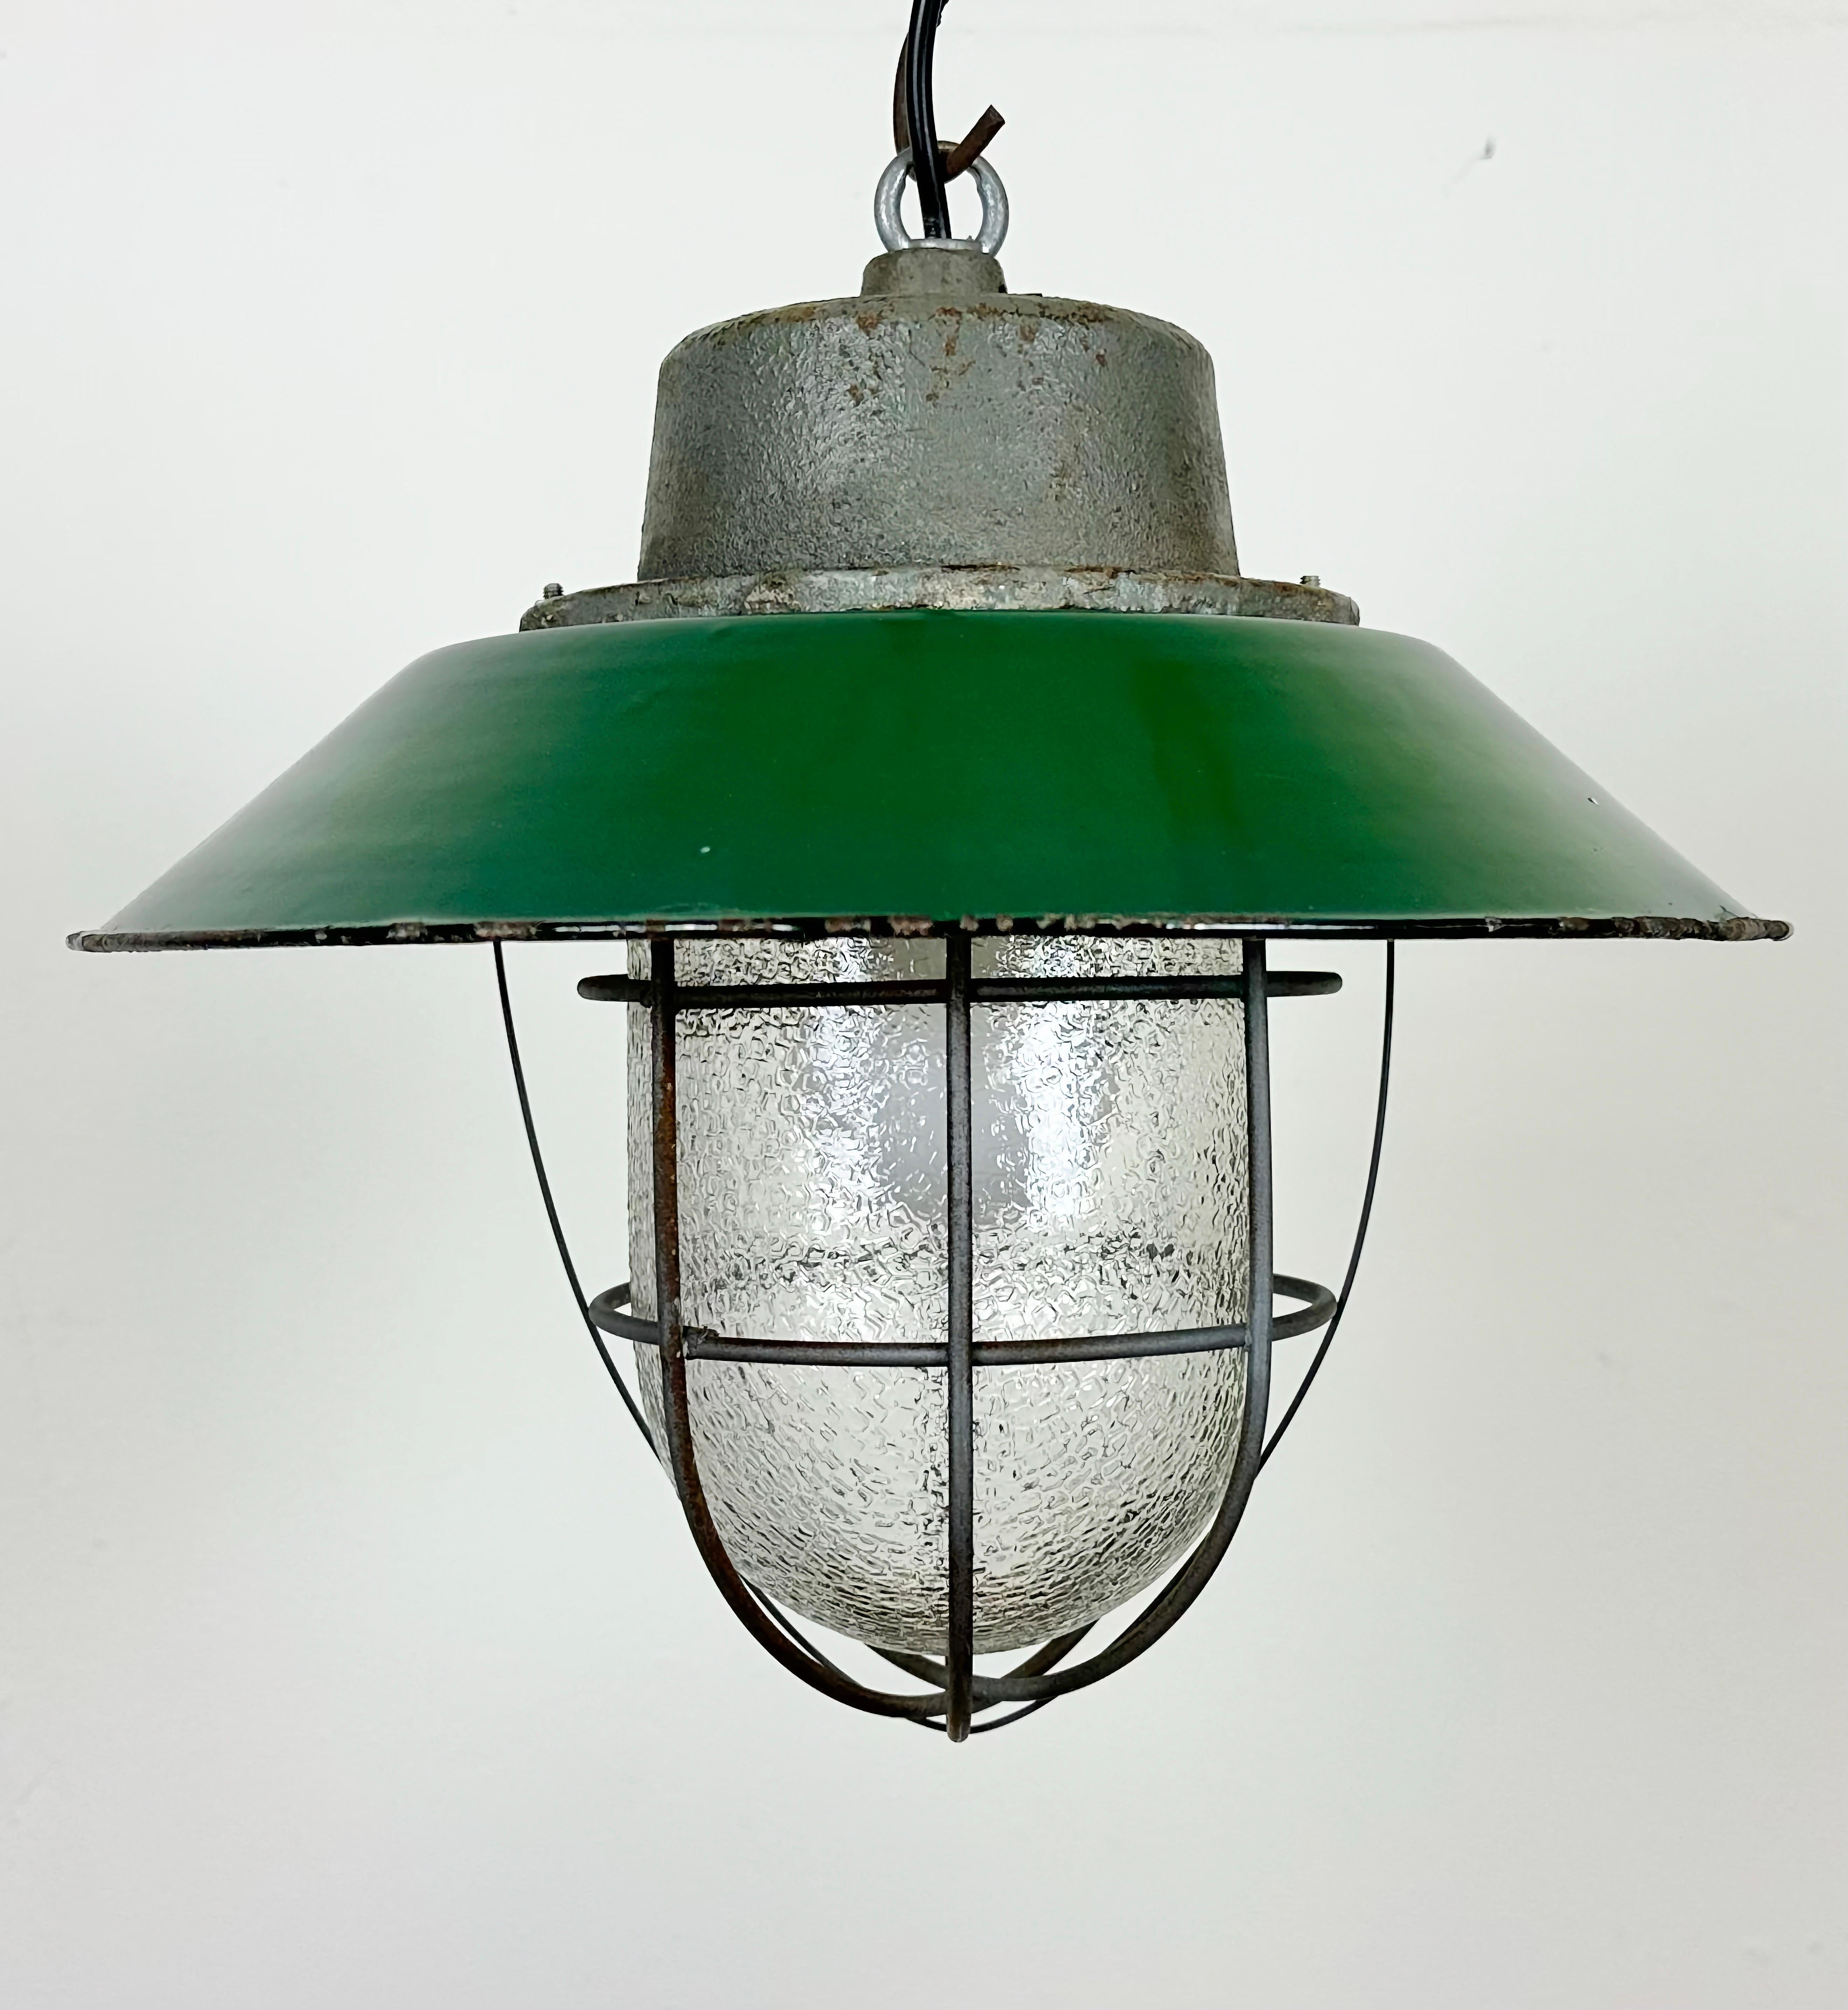 Polish Green Enamel and Cast Iron Industrial Cage Pendant Light, 1960s For Sale